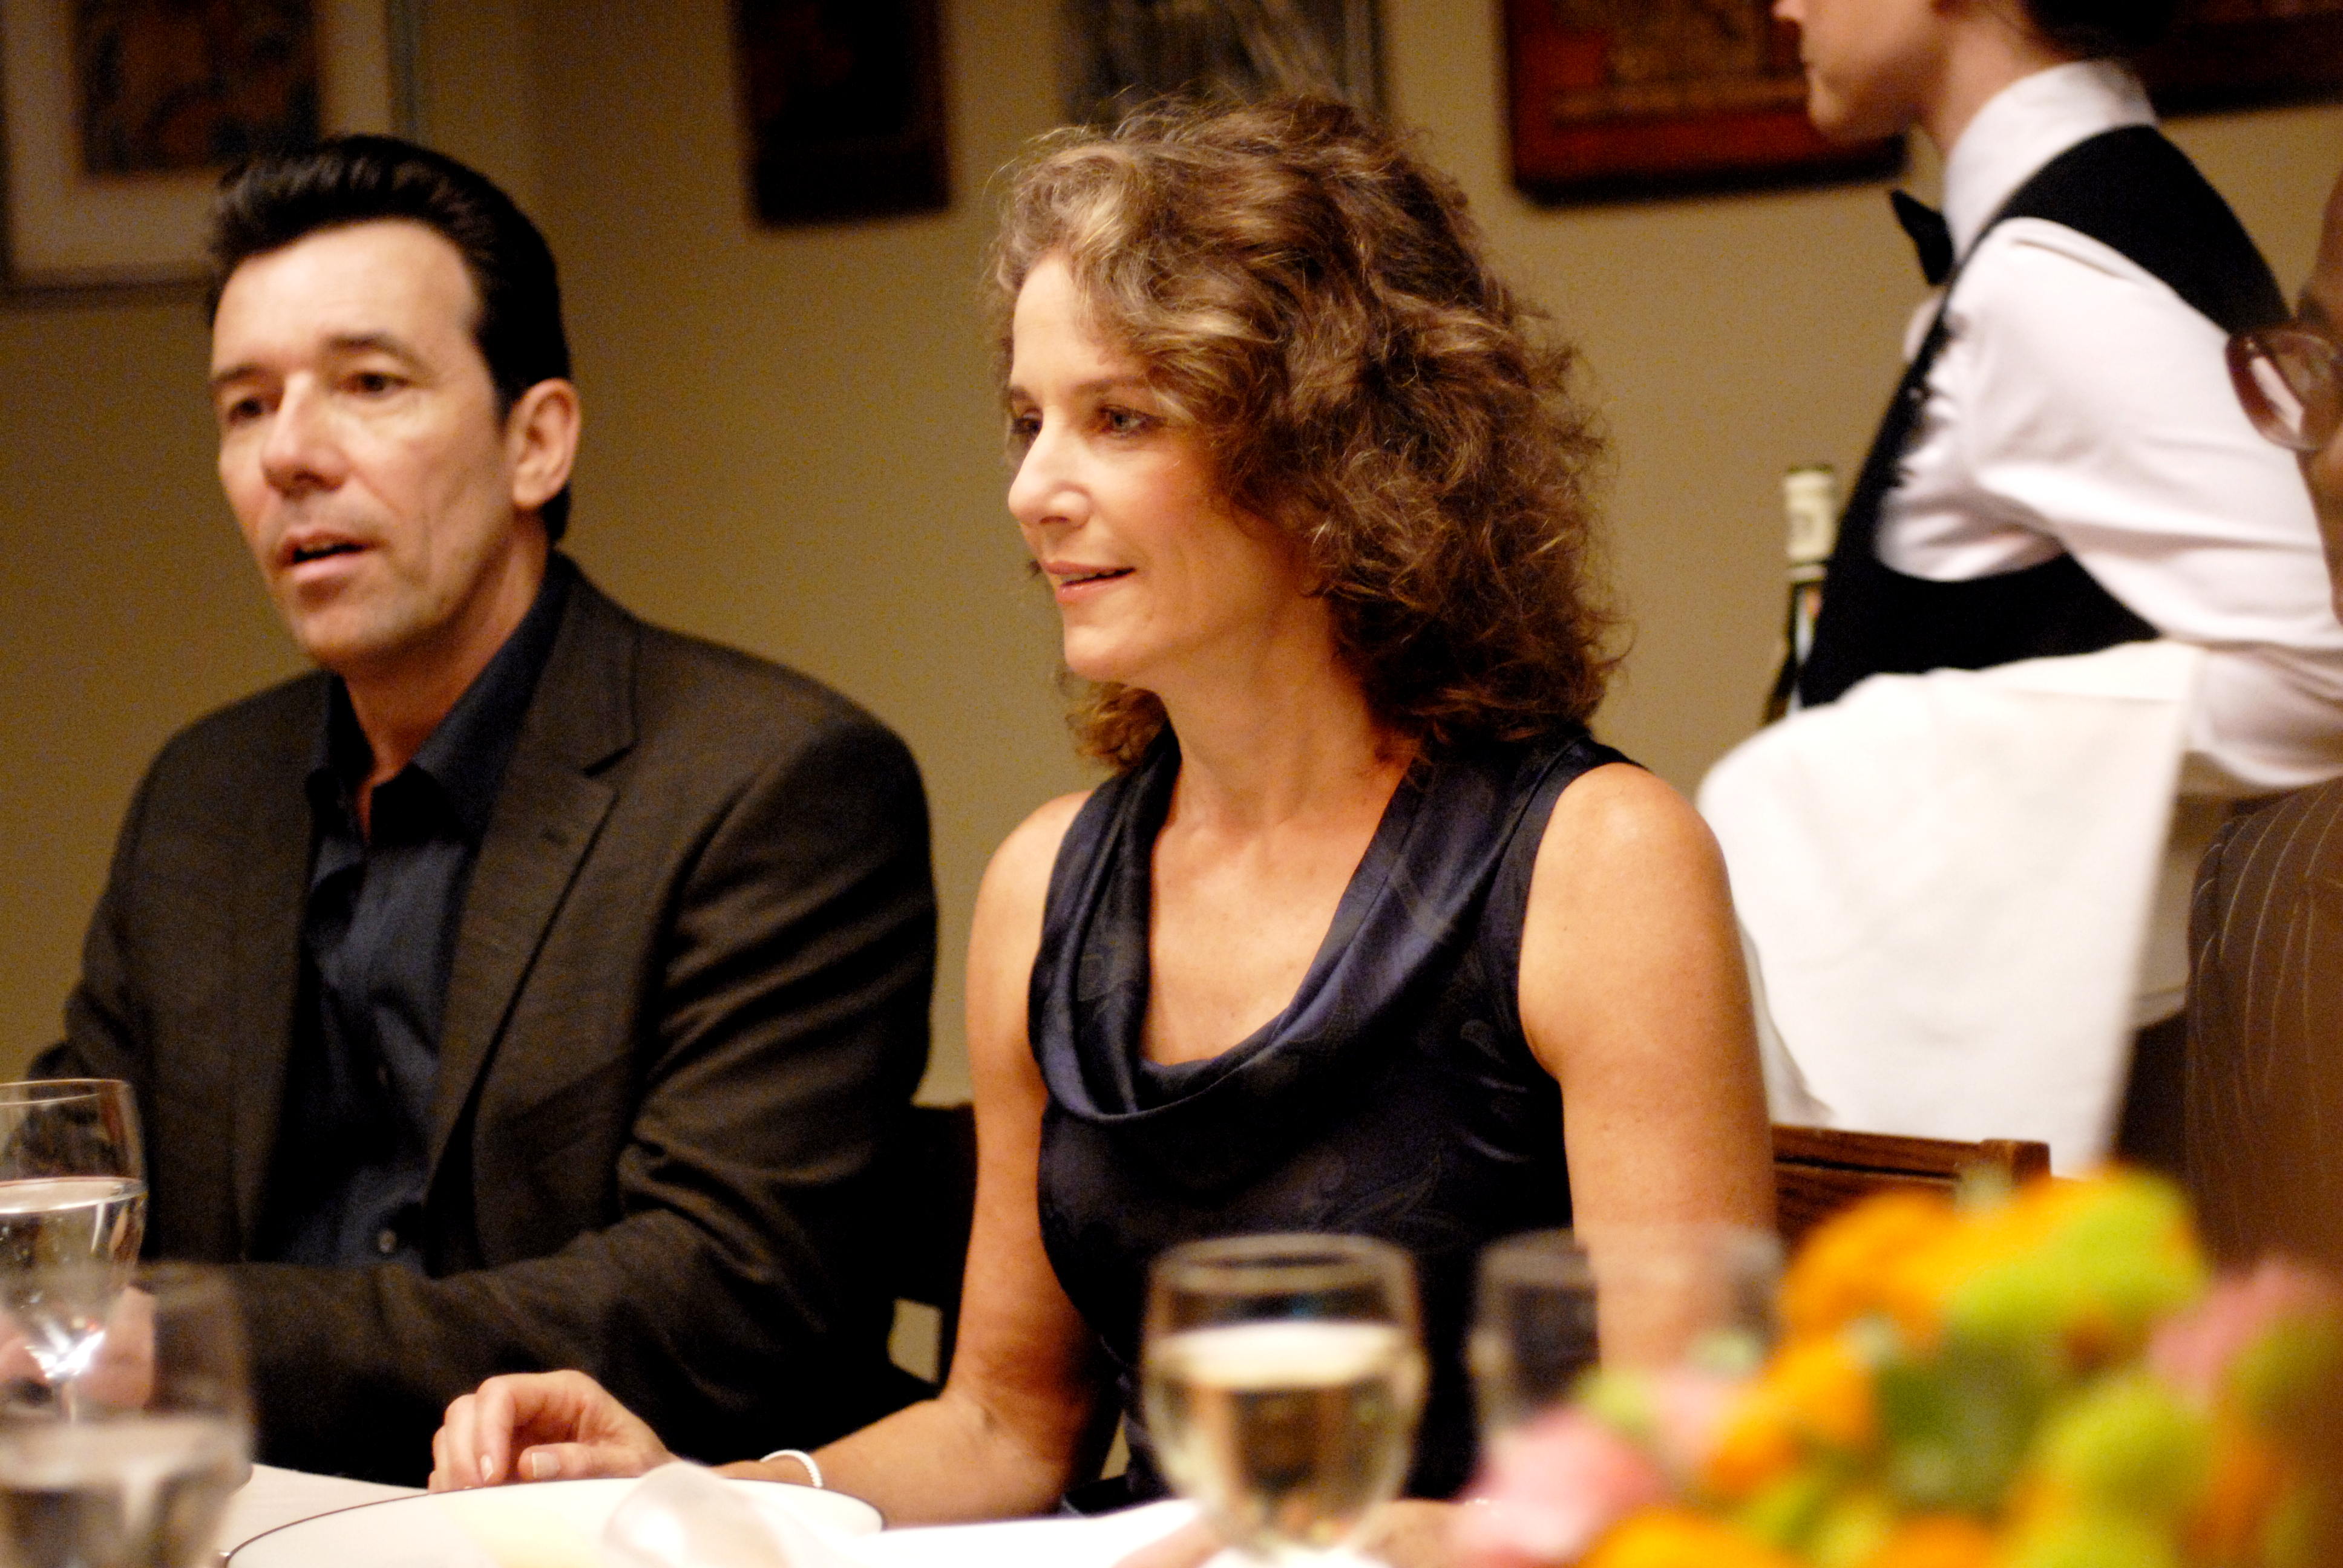 Jerome LePage as Andrew and Debra Winger as Abby in Sony Pictures Classics' Rachel Getting Married (2008). Photo by Bob Vergara.